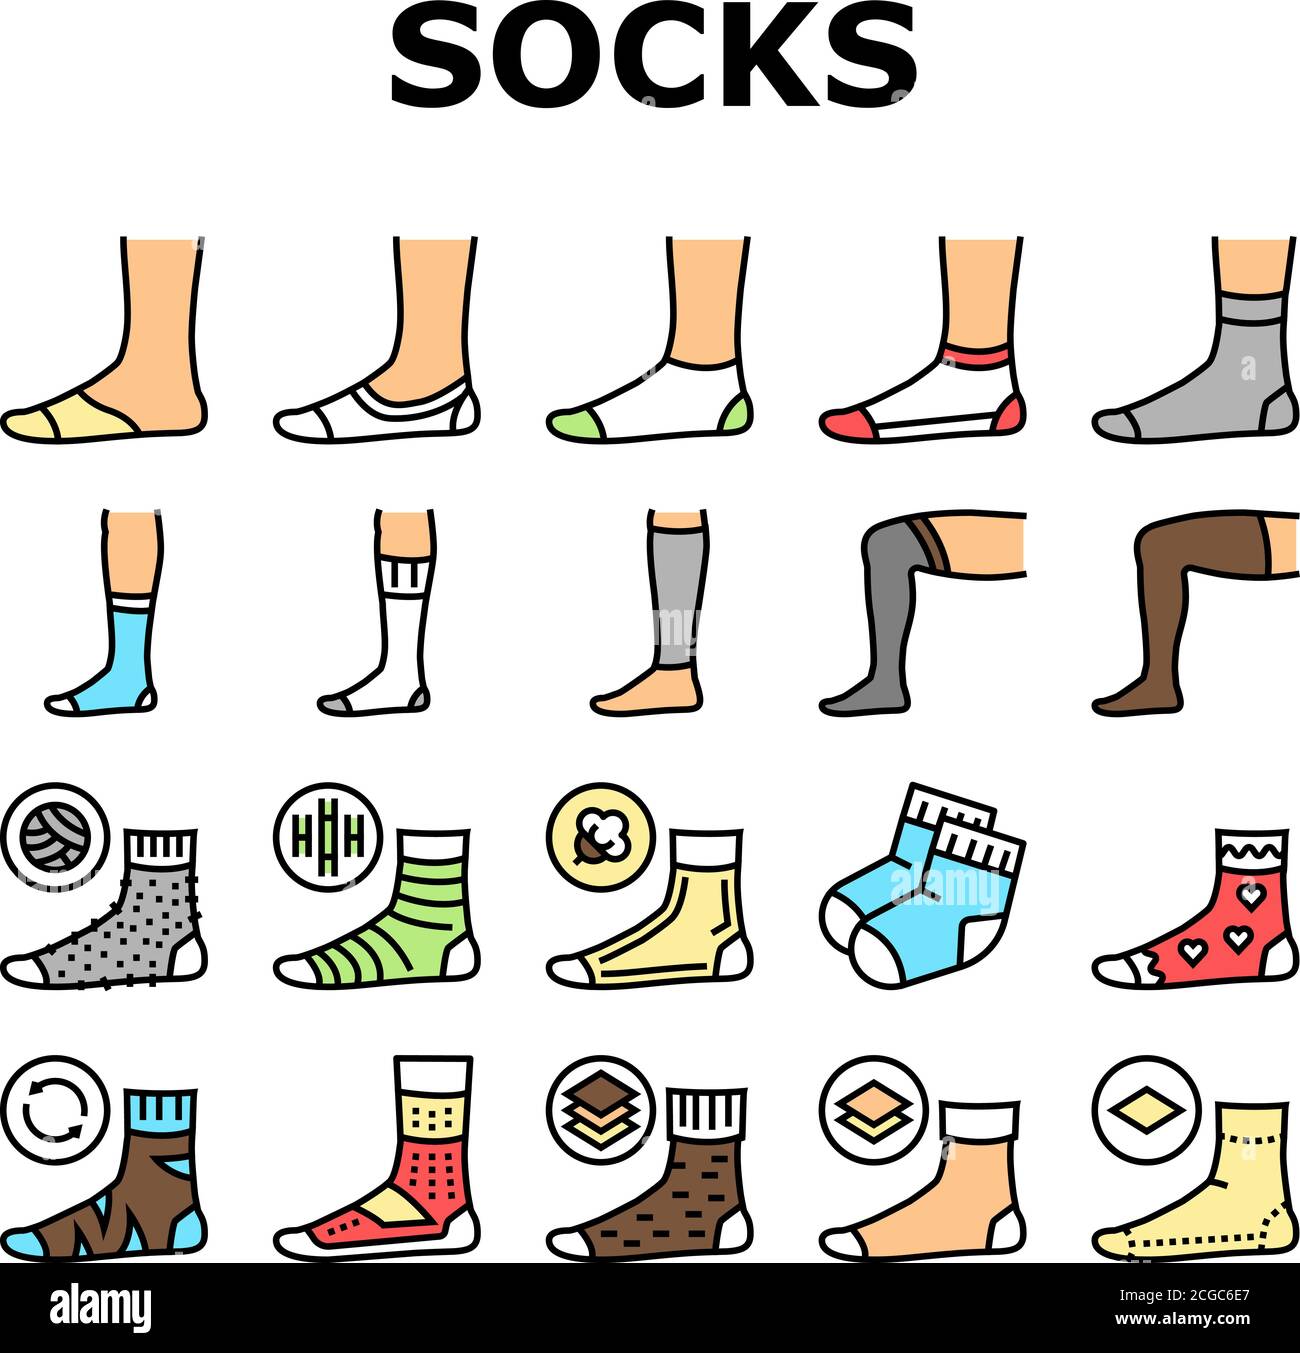 Loose Socks High Resolution Stock Photography and Images - Alamy